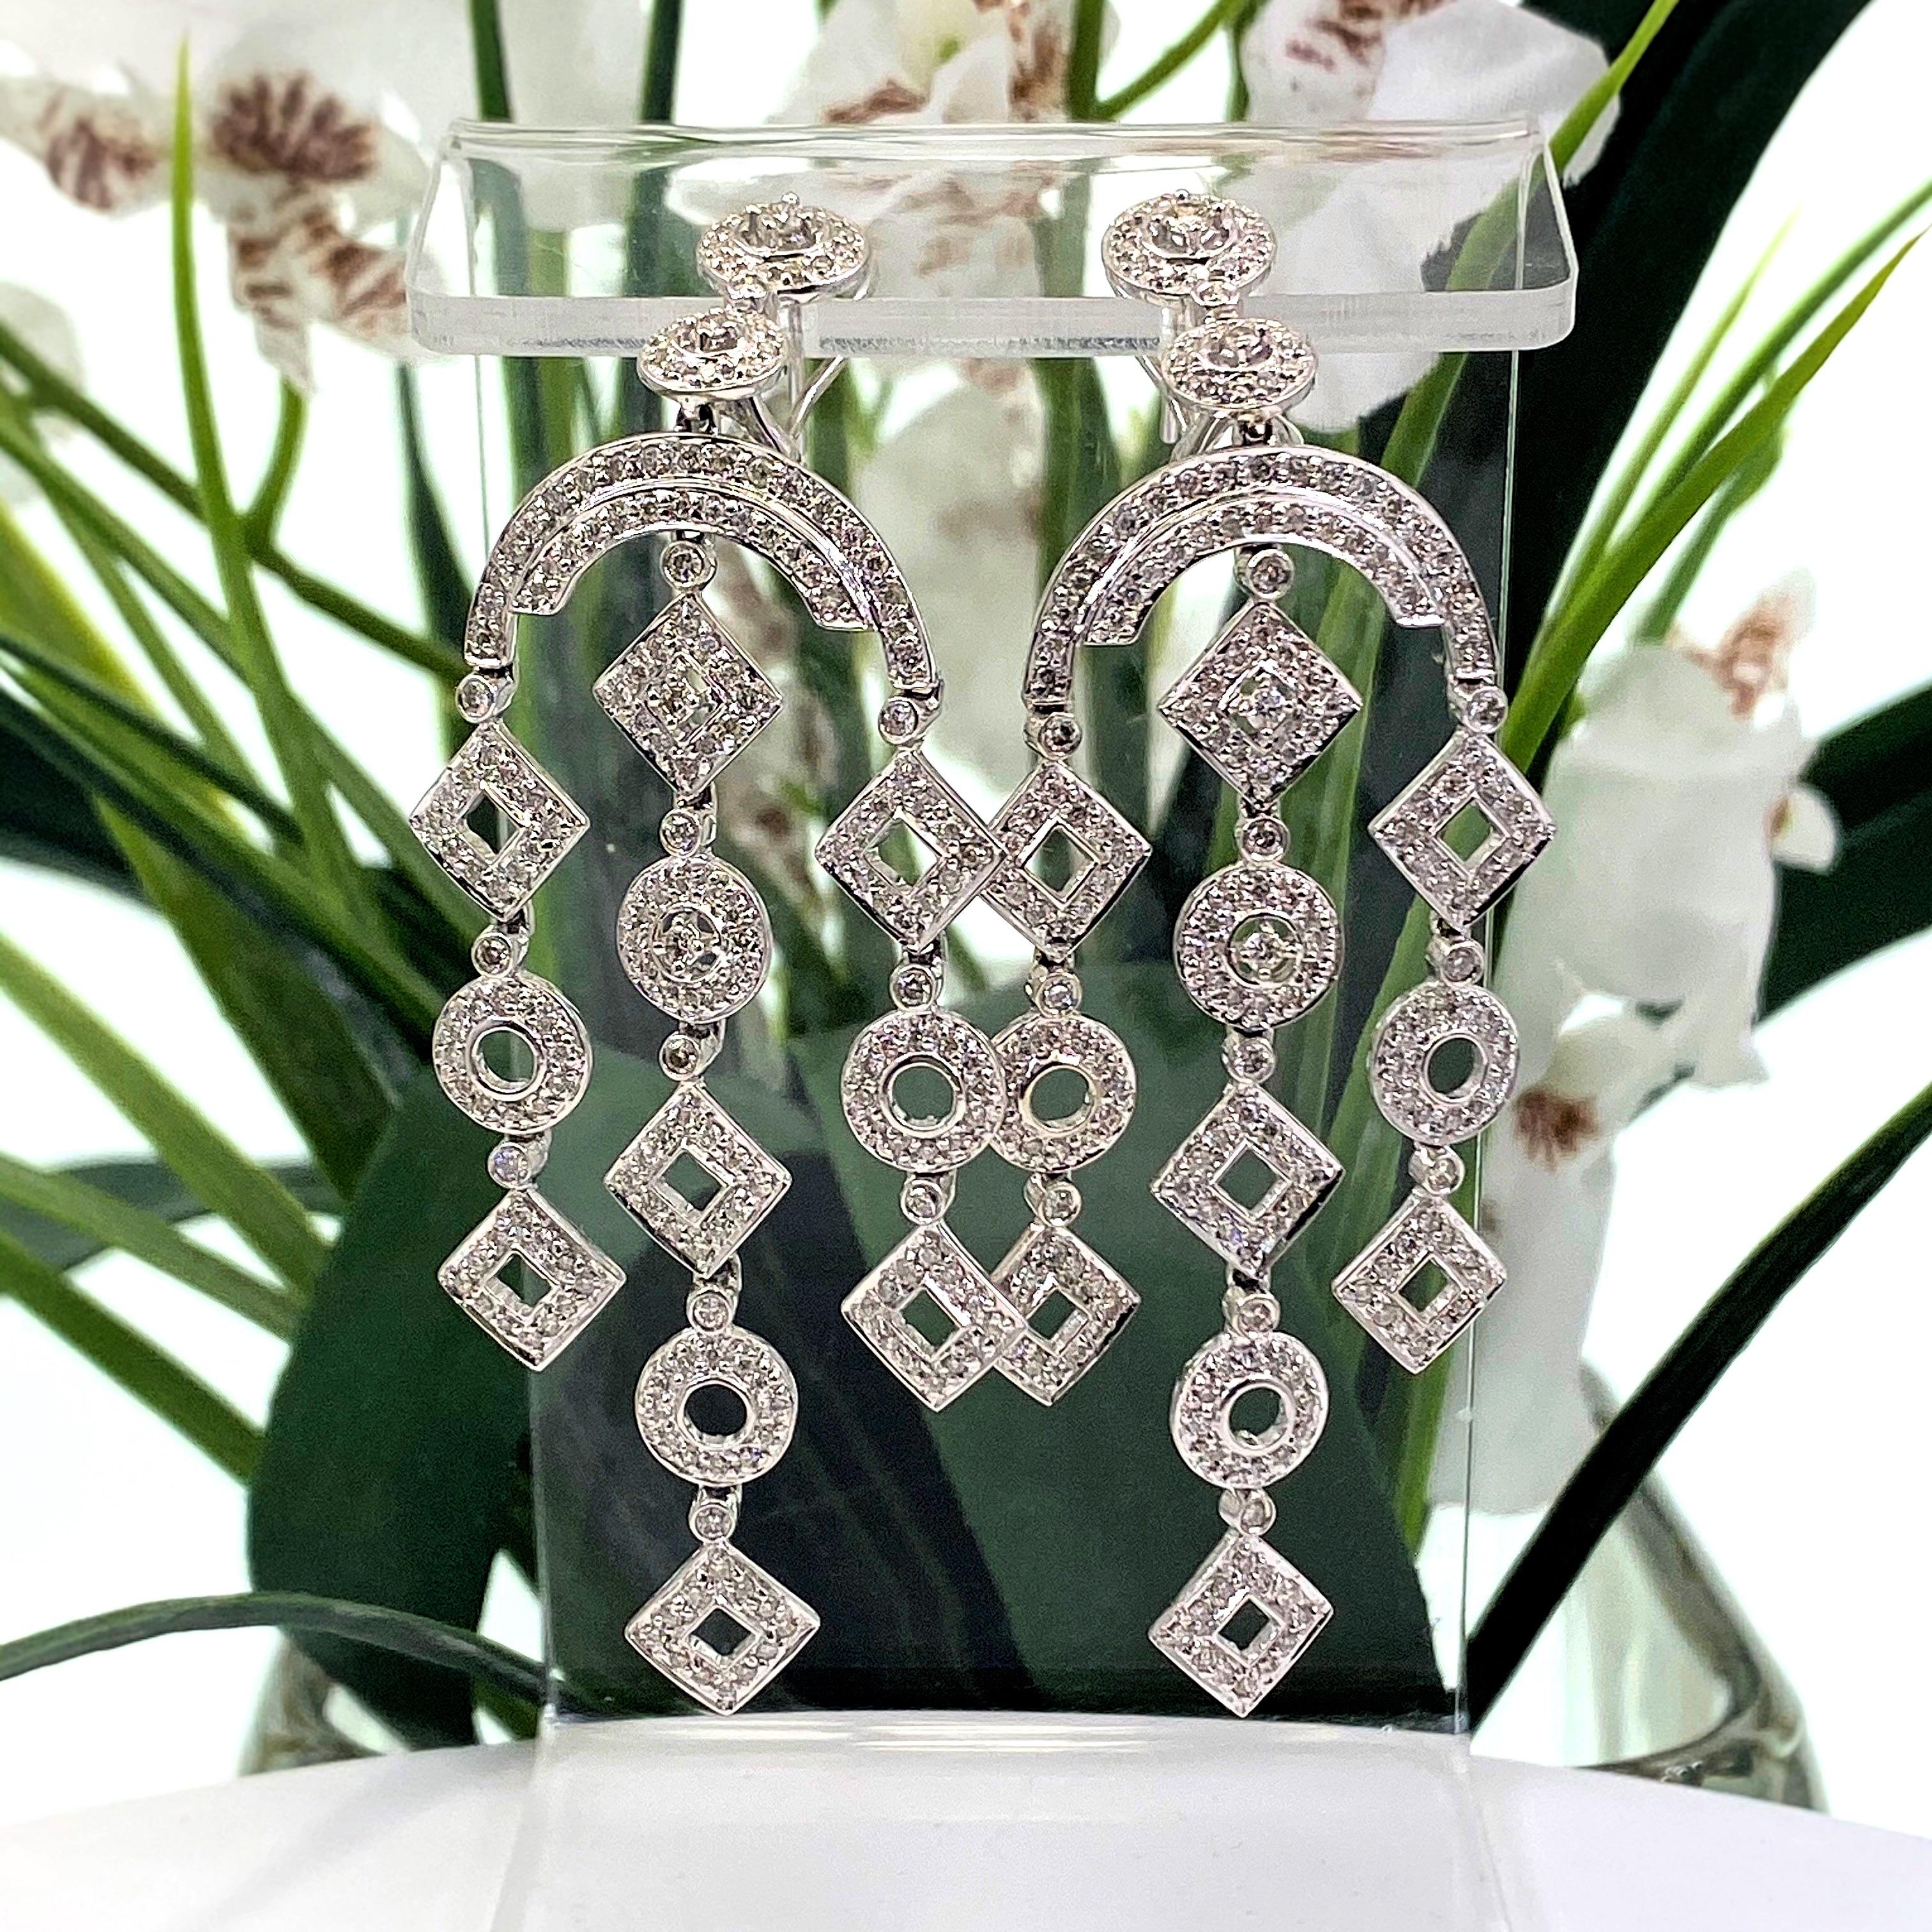 Diamond Chandelier Earrings 
Style:  Geometric Shaped Dangle Earrings
Metal:  14K White Gold
Size / Measurements:  2.80'' long x 1'' wide
TCW:  2.00 carats total approximate
Diamonds:  201 Round Brilliant Cut Diamonds
Color & Clarity:  H - I color, 